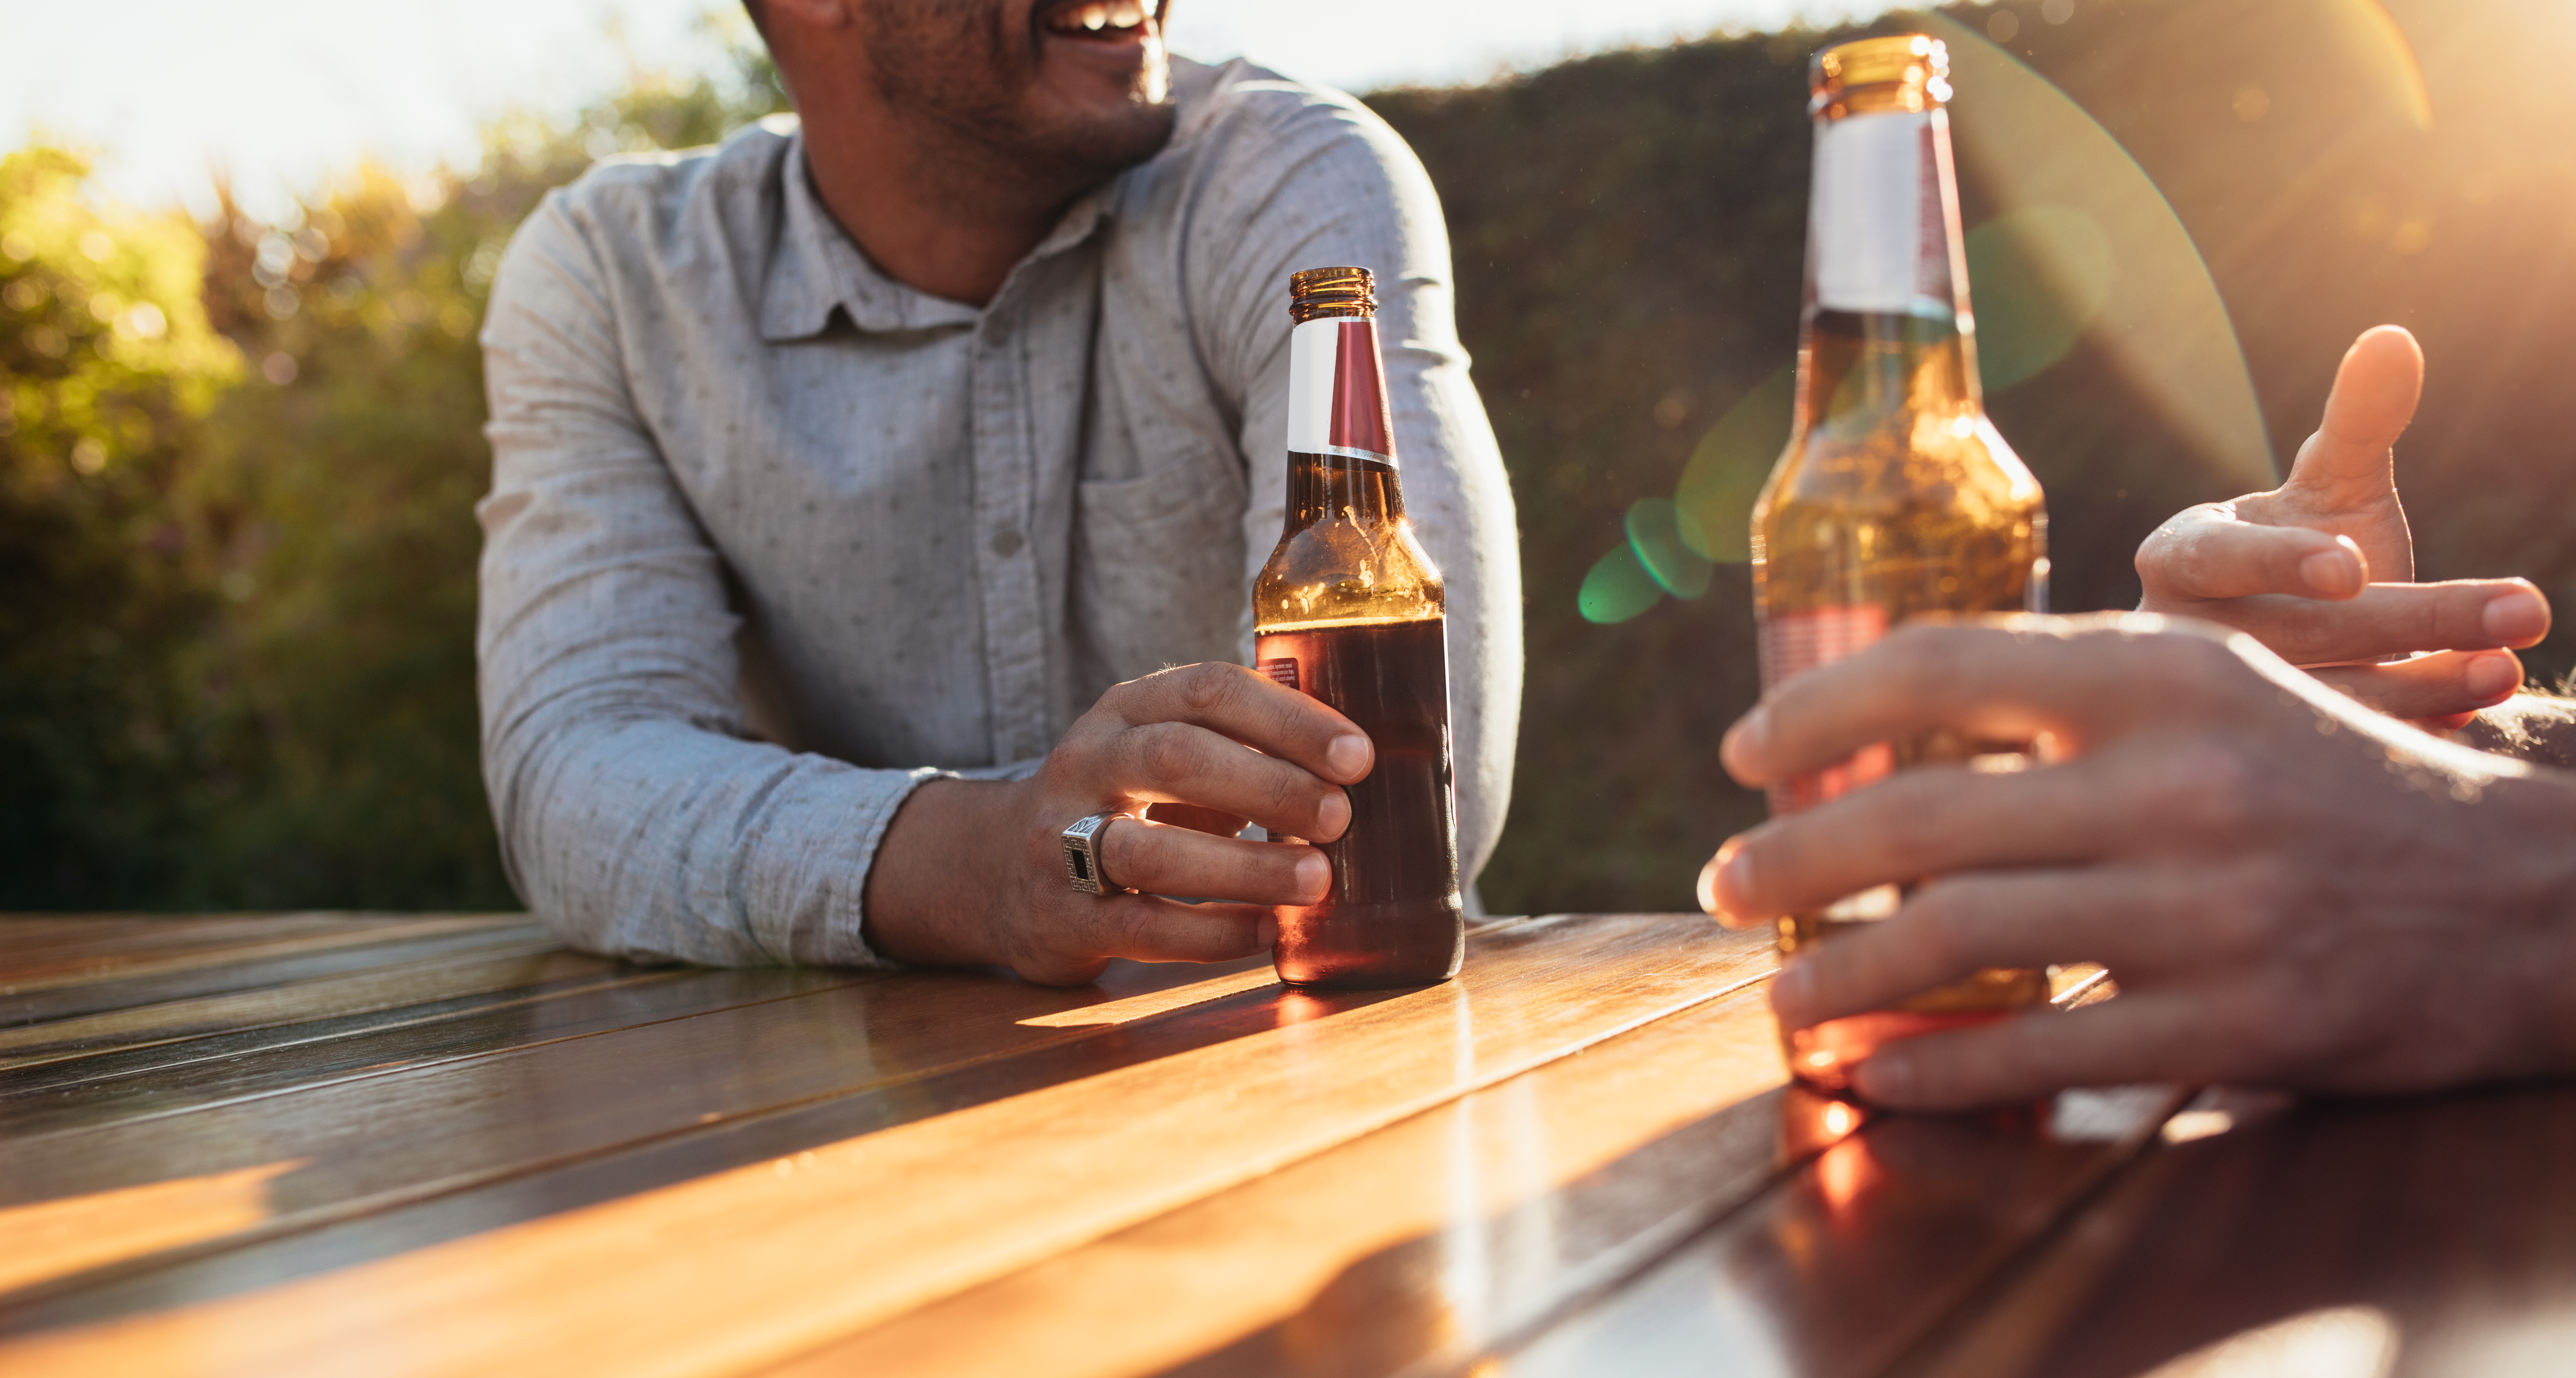 How to build a better relationship with alcohol